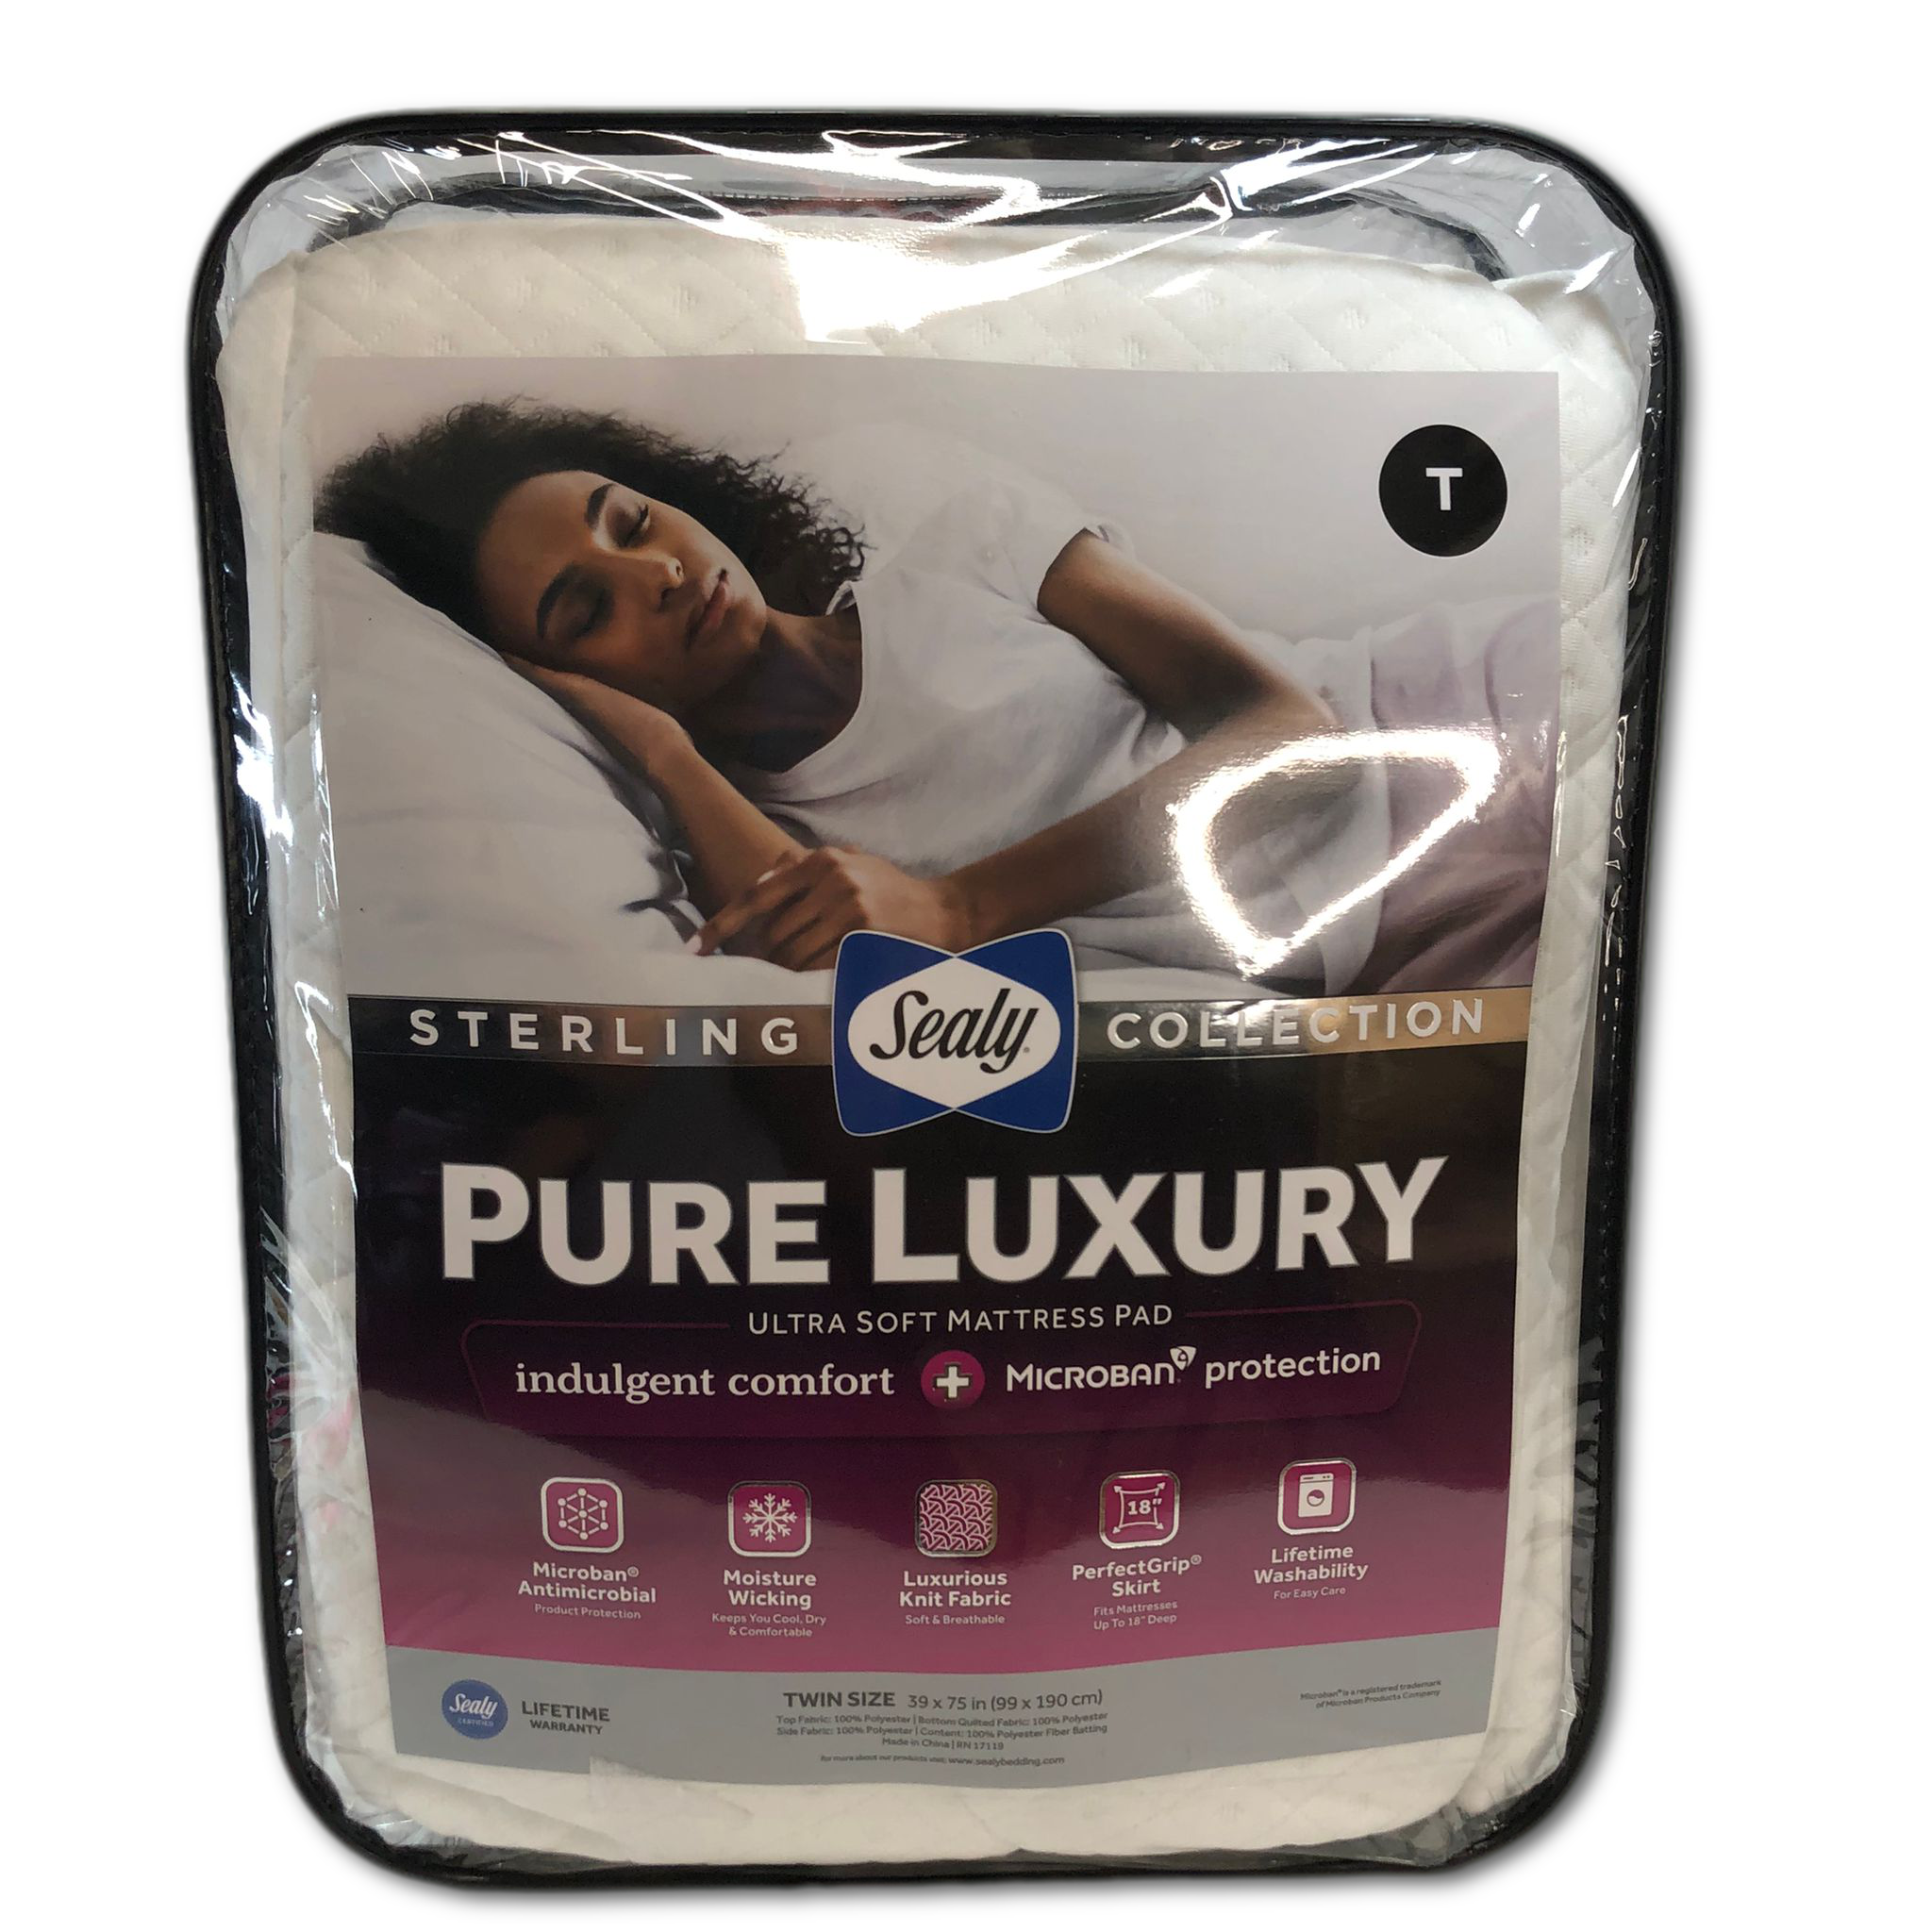 Sealy Sterling Collection Pure Luxury Mattress Pad